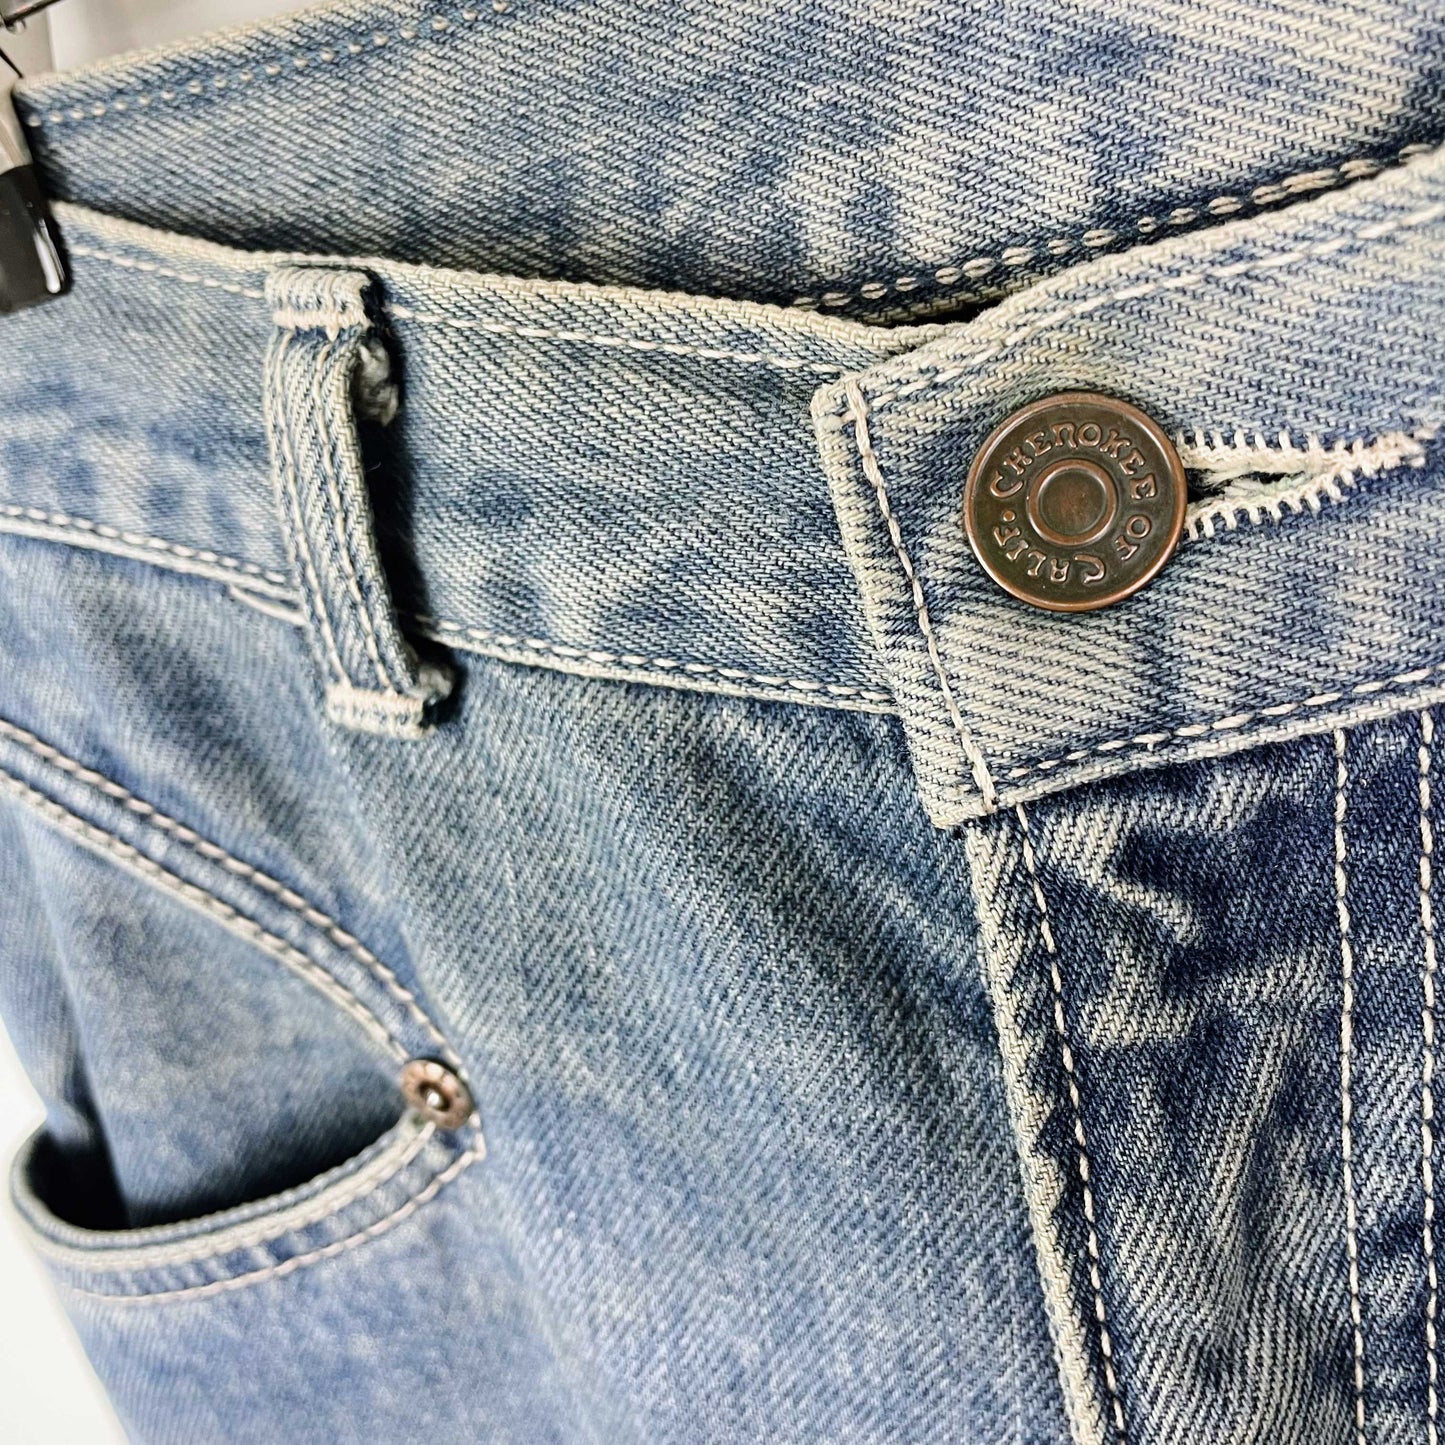 vintage cherokee of california high rise jeans - size 27